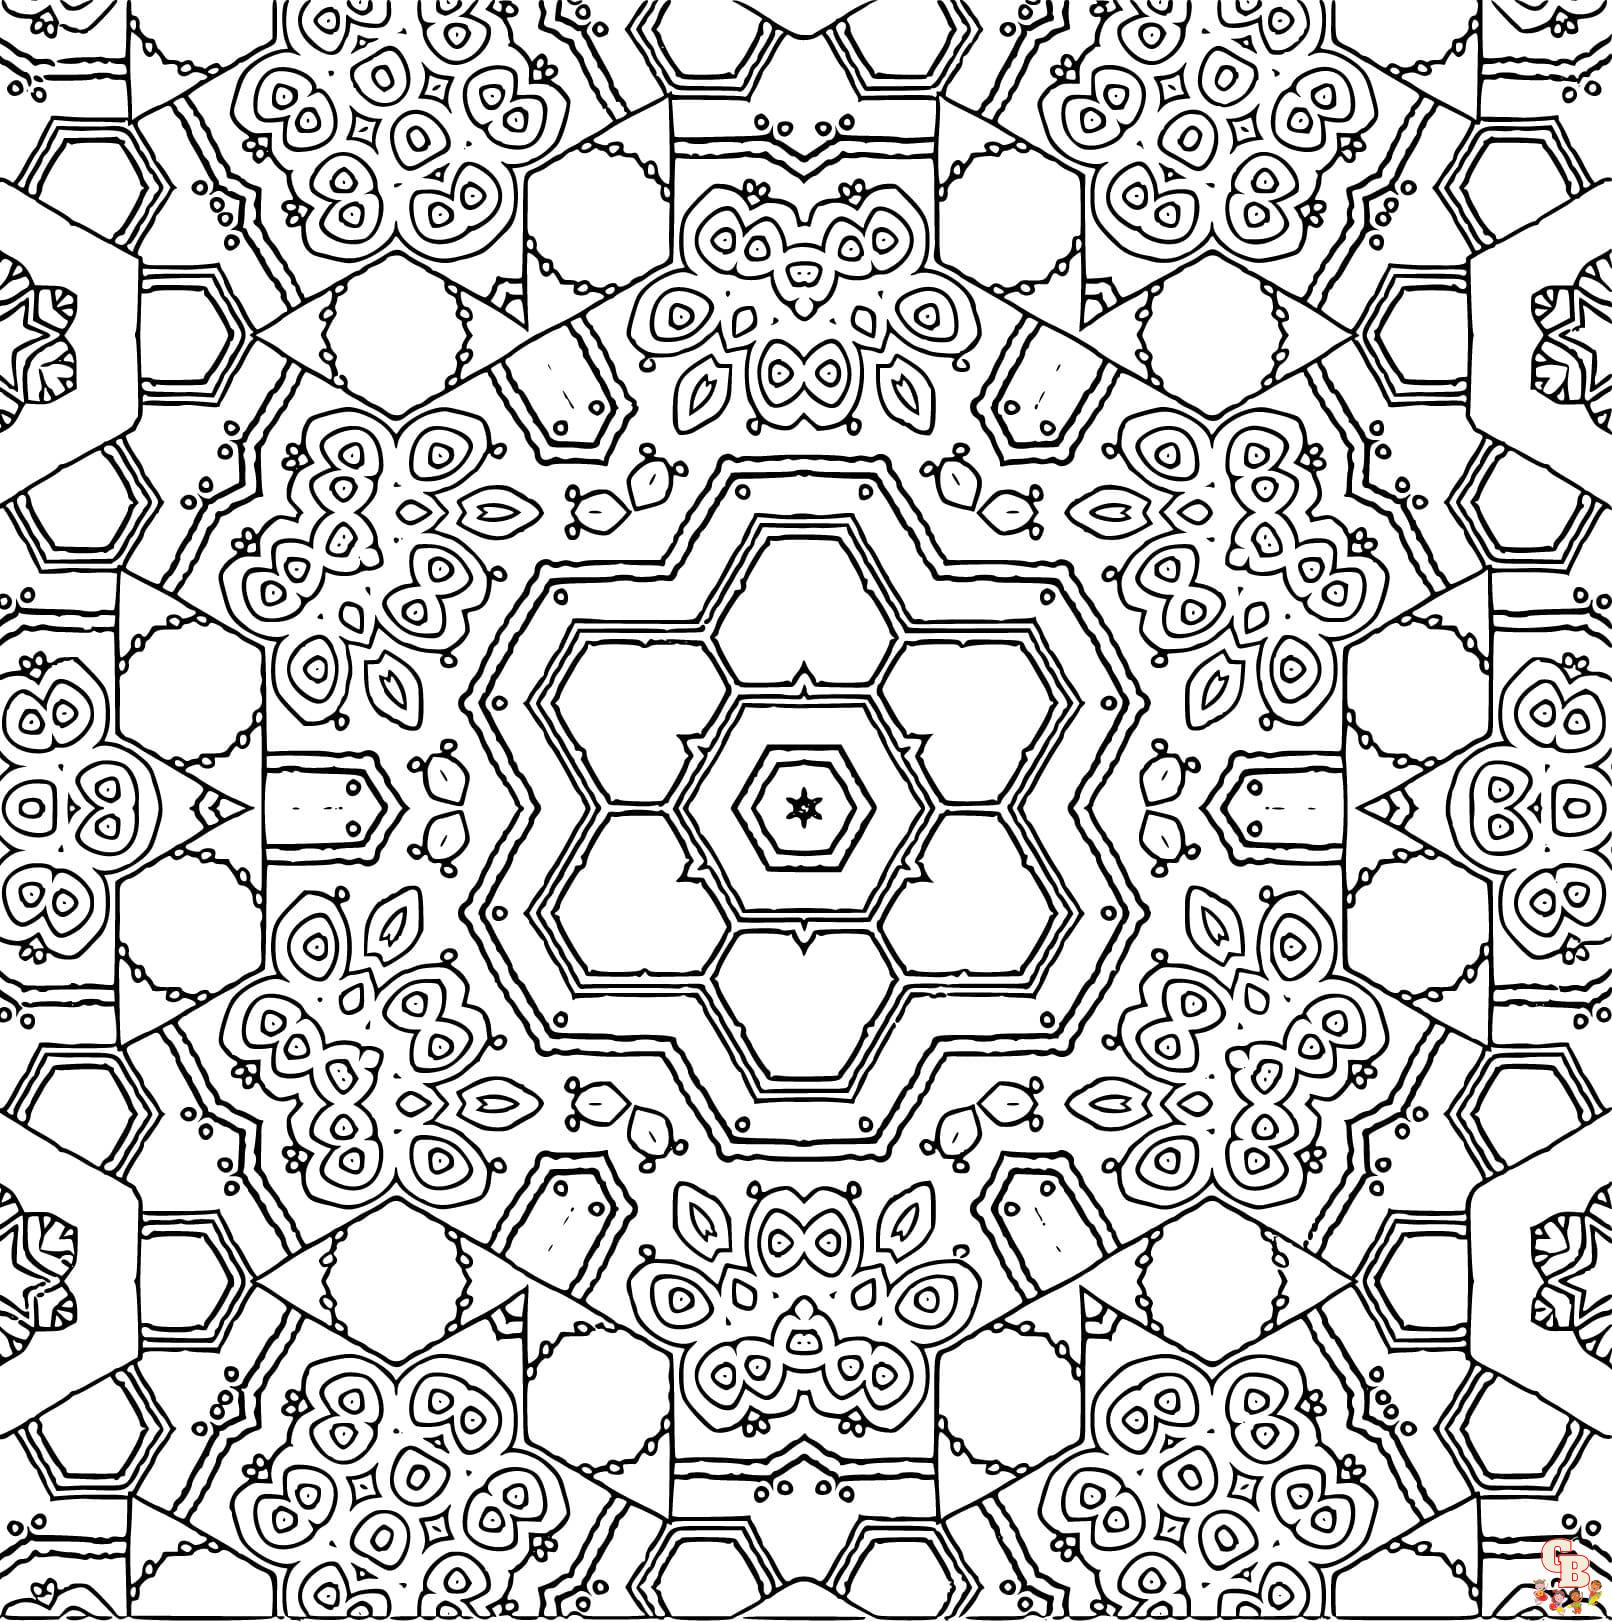 Free Hexagon coloring pages for kids